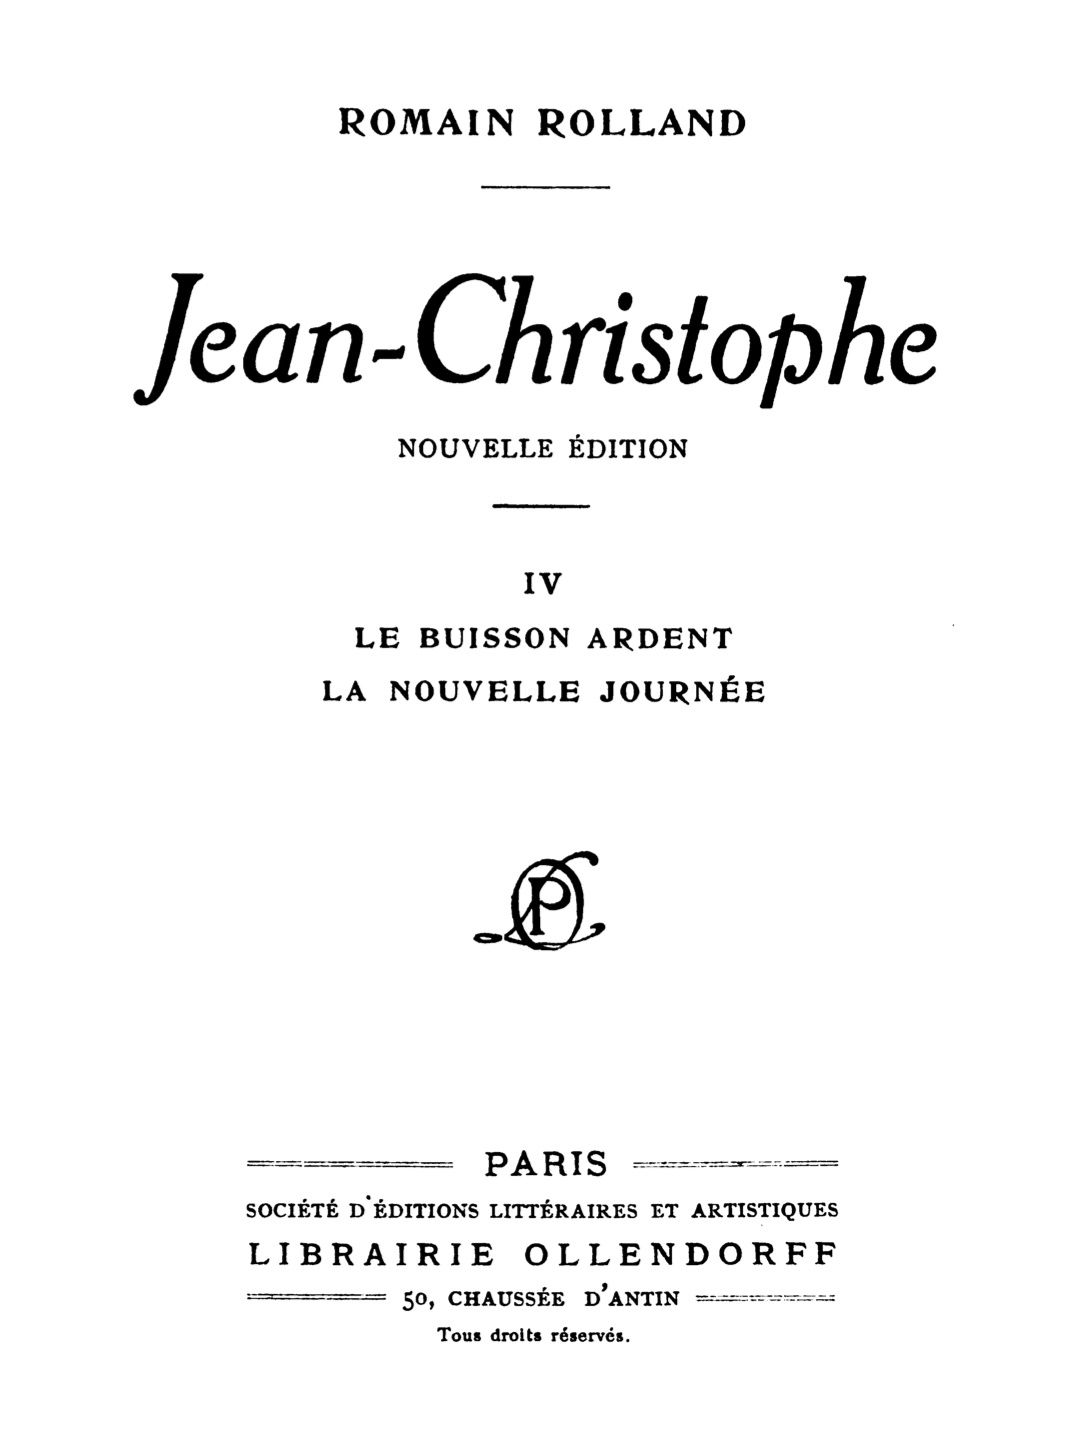 The Project Gutenberg eBook of Jean-Christophe Volume 4 (of 4), by Romain  Rolland.